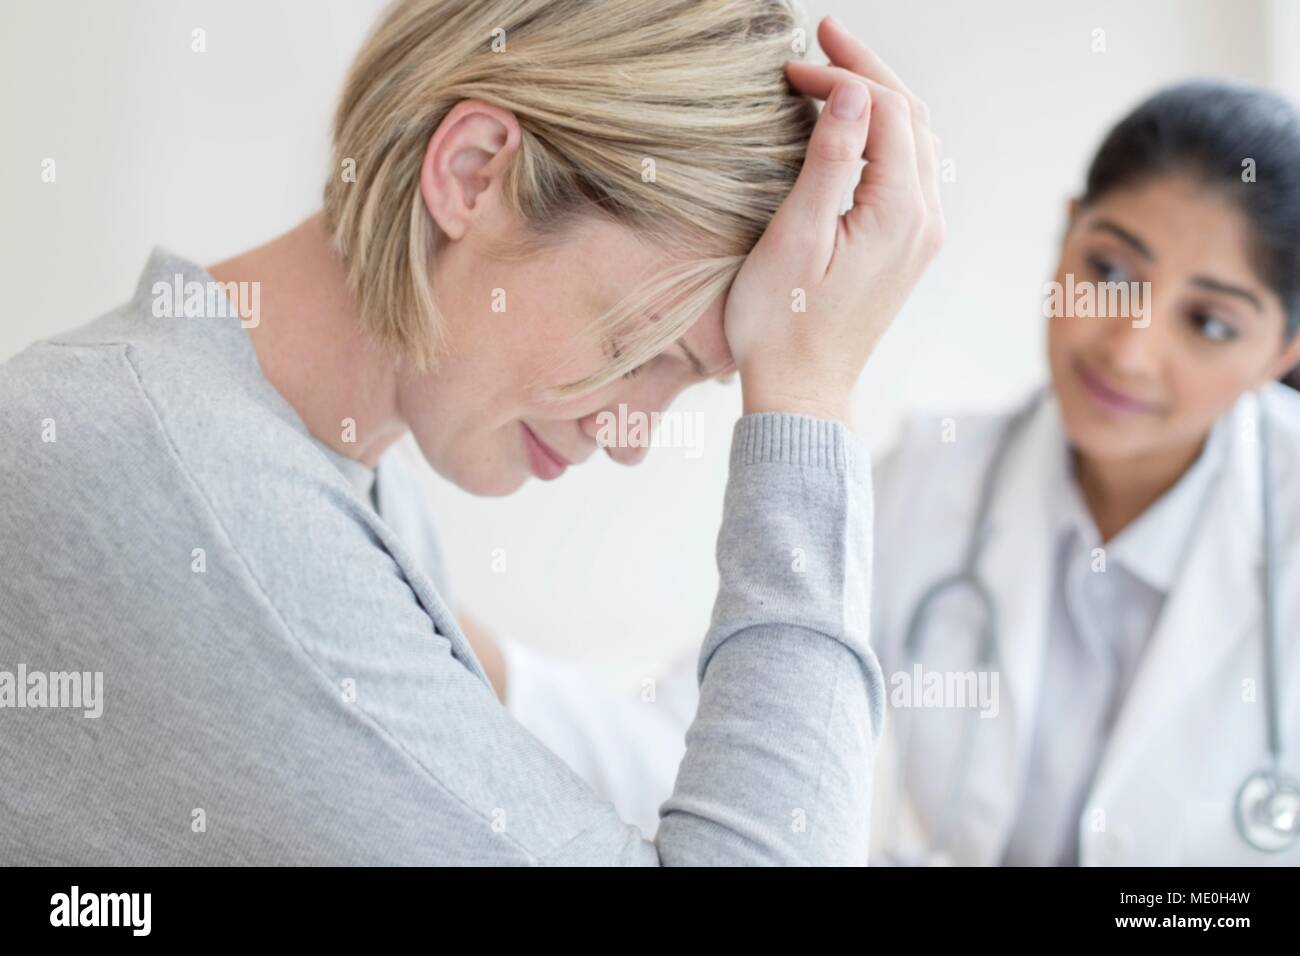 Female doctor listening to patient. Stock Photo